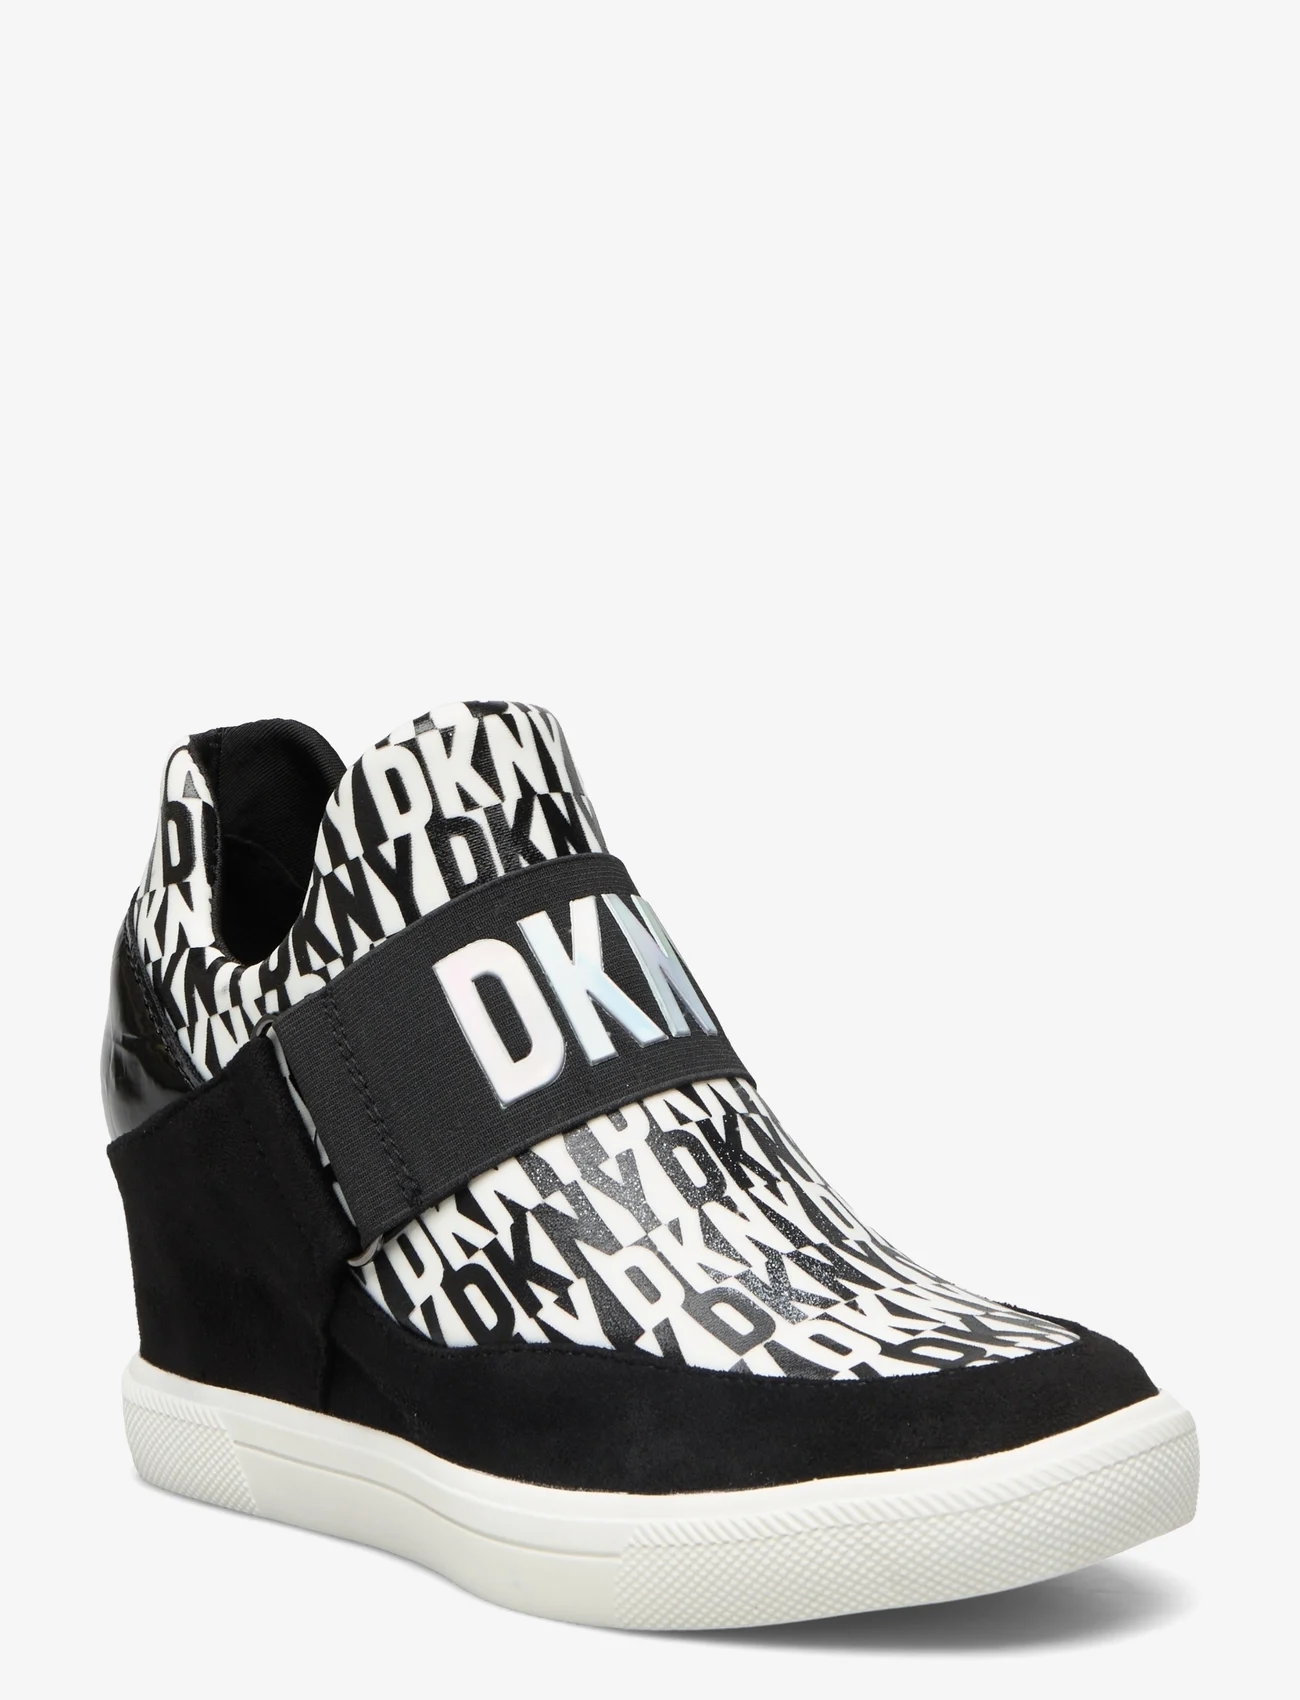 DKNY - COSMOS - lave sneakers - black/white - 0